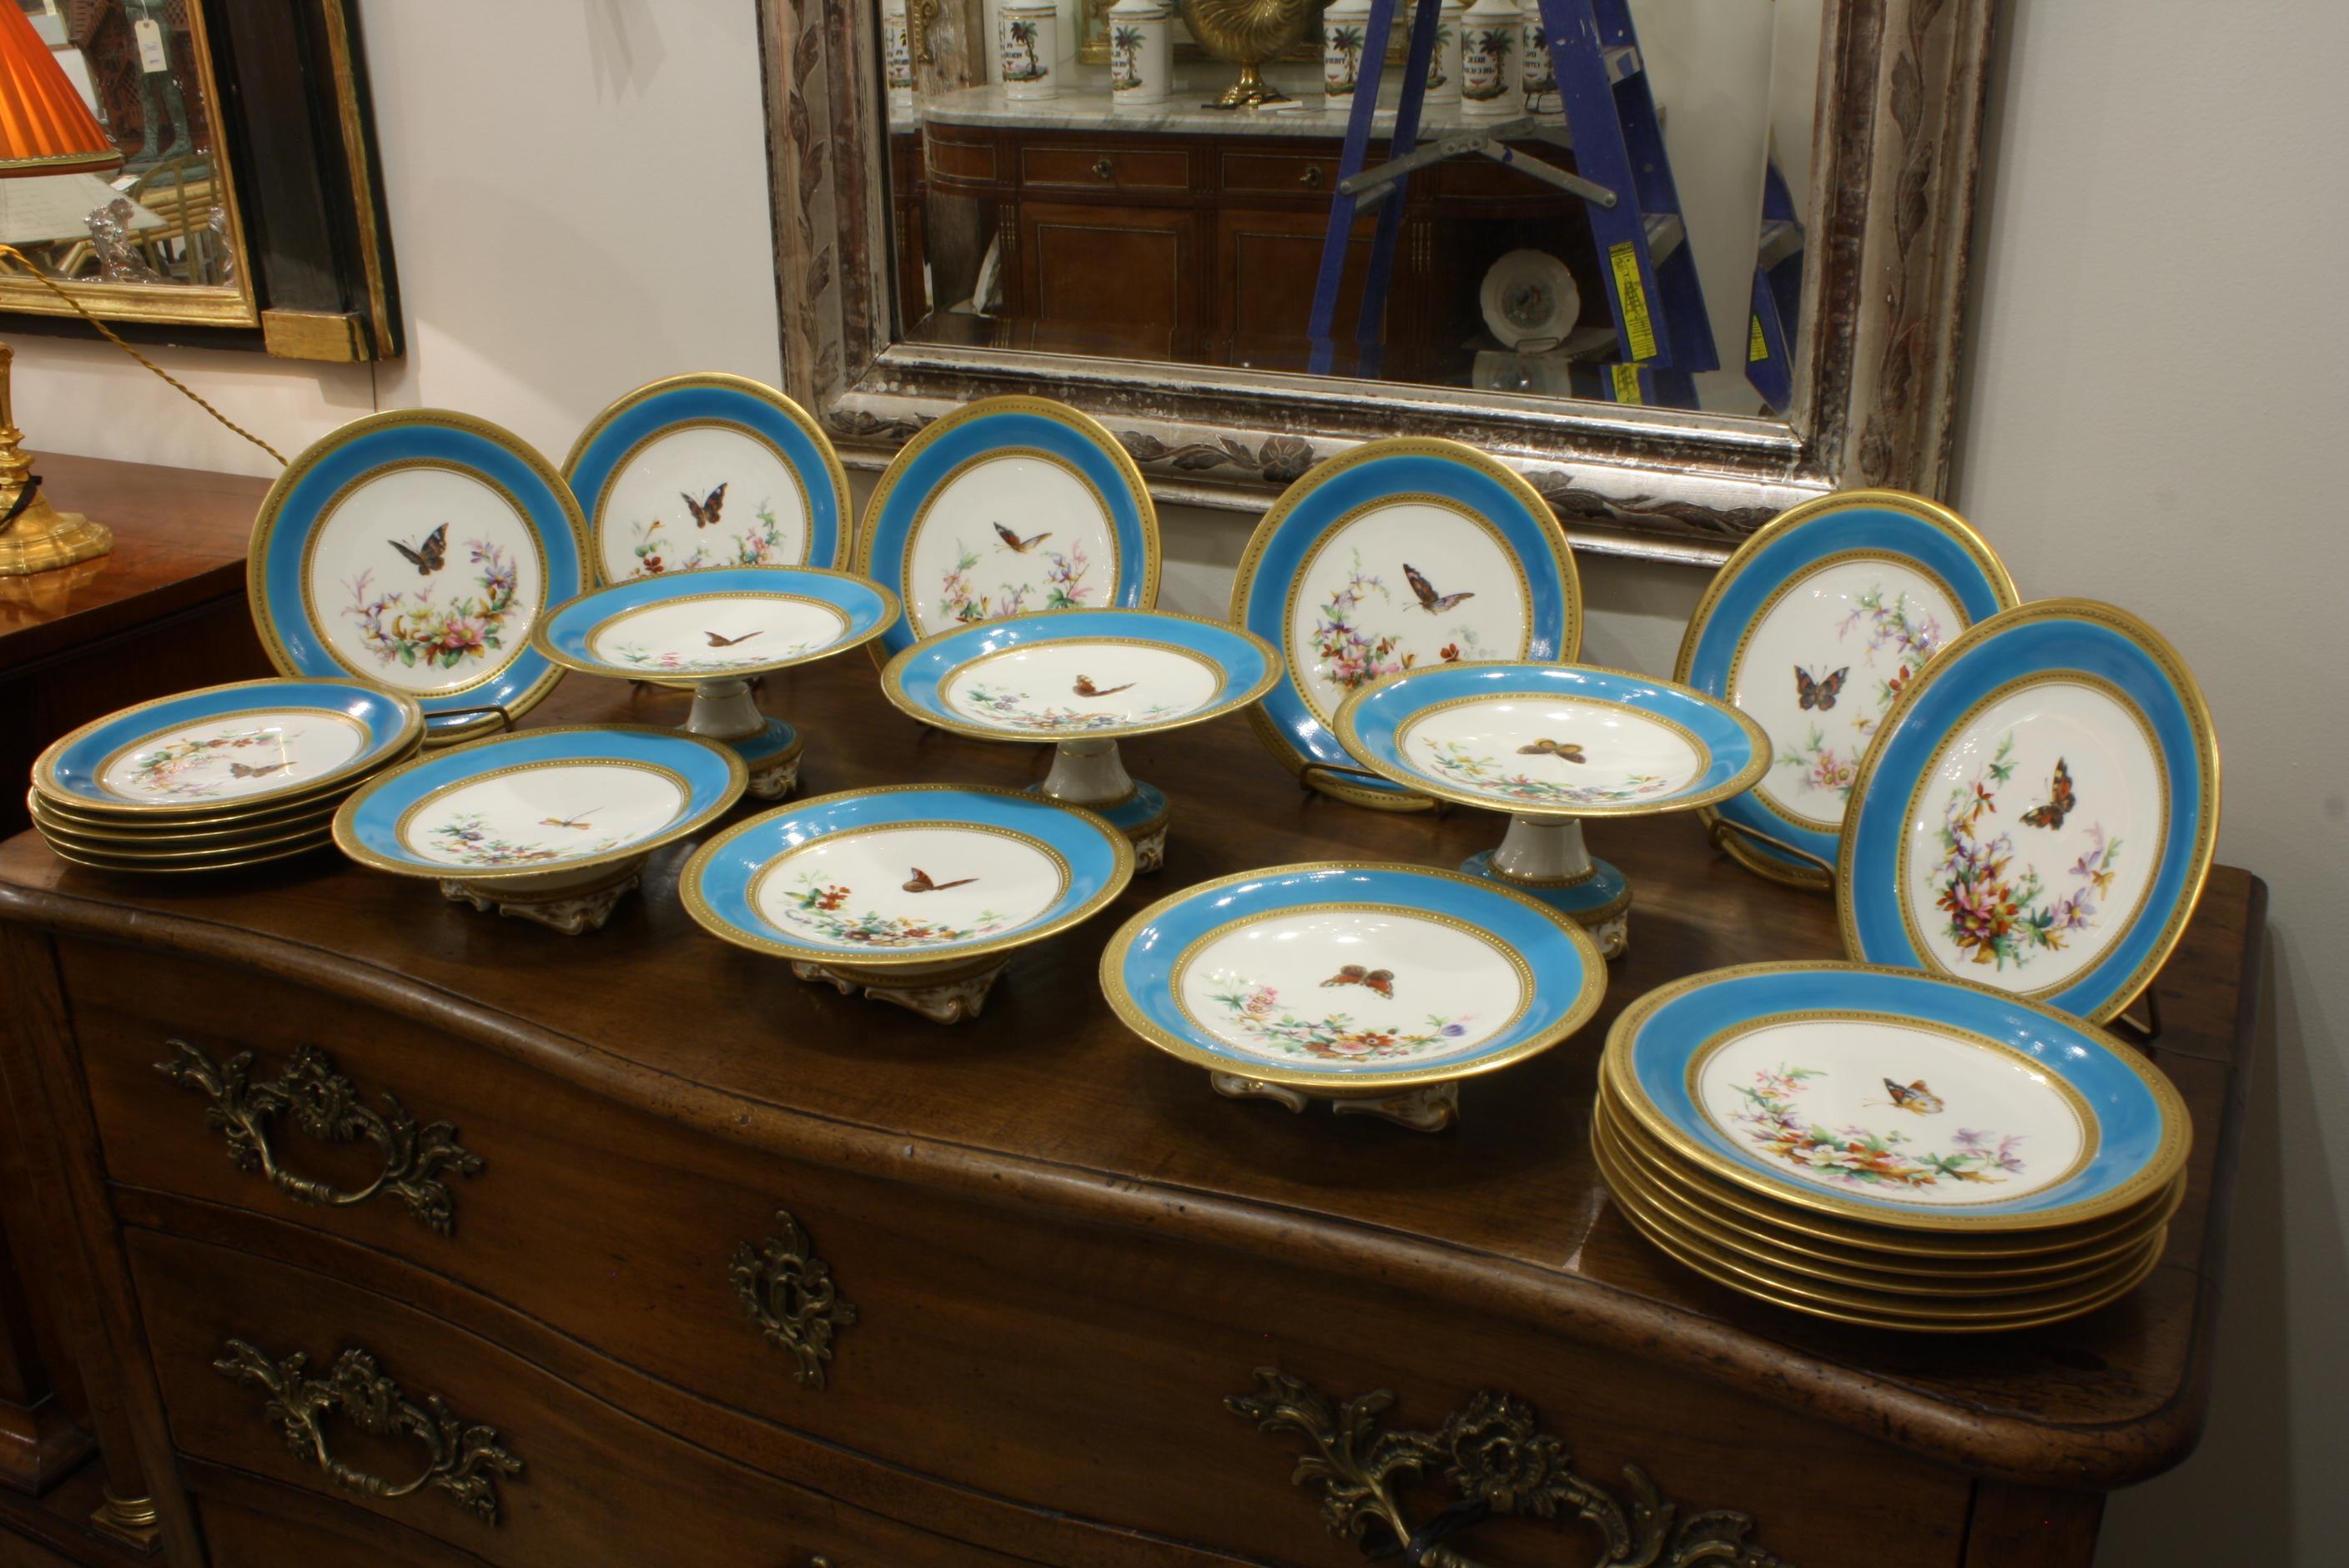 Extraordinary porcelain dessert service attributed to Minton comprising 23 pieces with turquoise ground, hand painted butterflies, flowers and floral garlands. The perimeters and inside diameters of the plates are beaded and gilded. The service